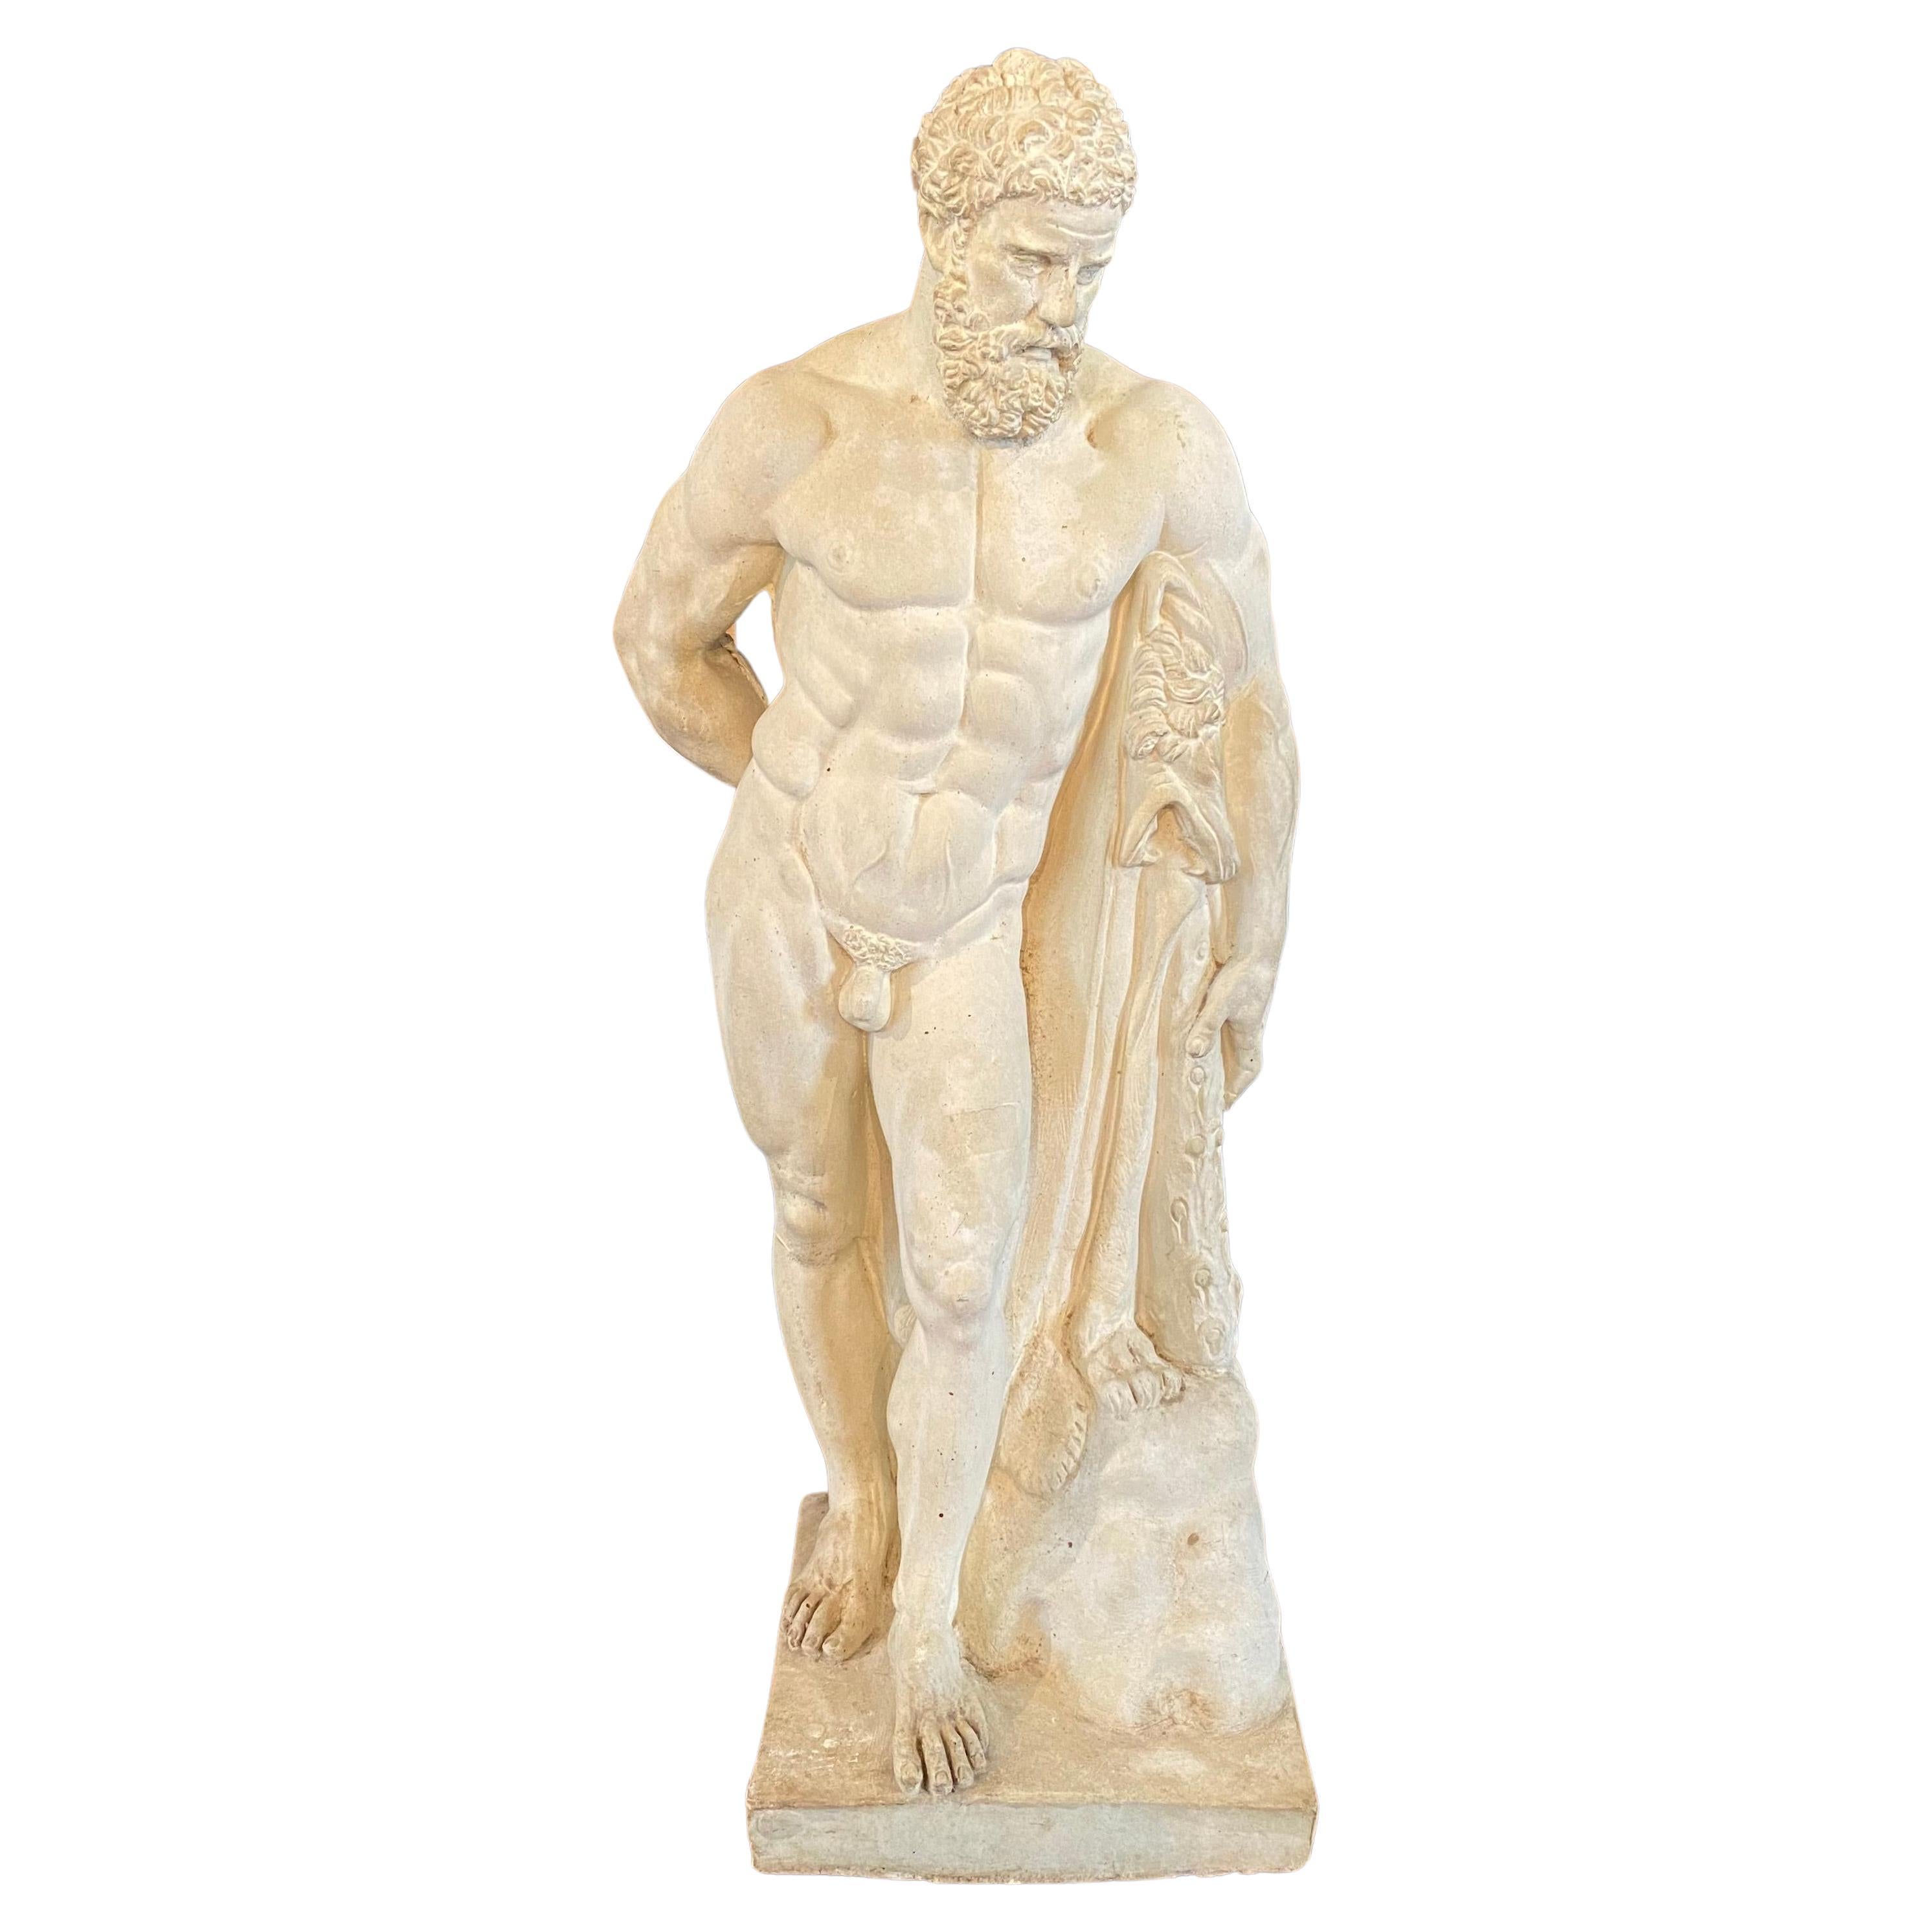 Sensual Realistic French Sculpture of Male Nude Mythological Figure Hercules